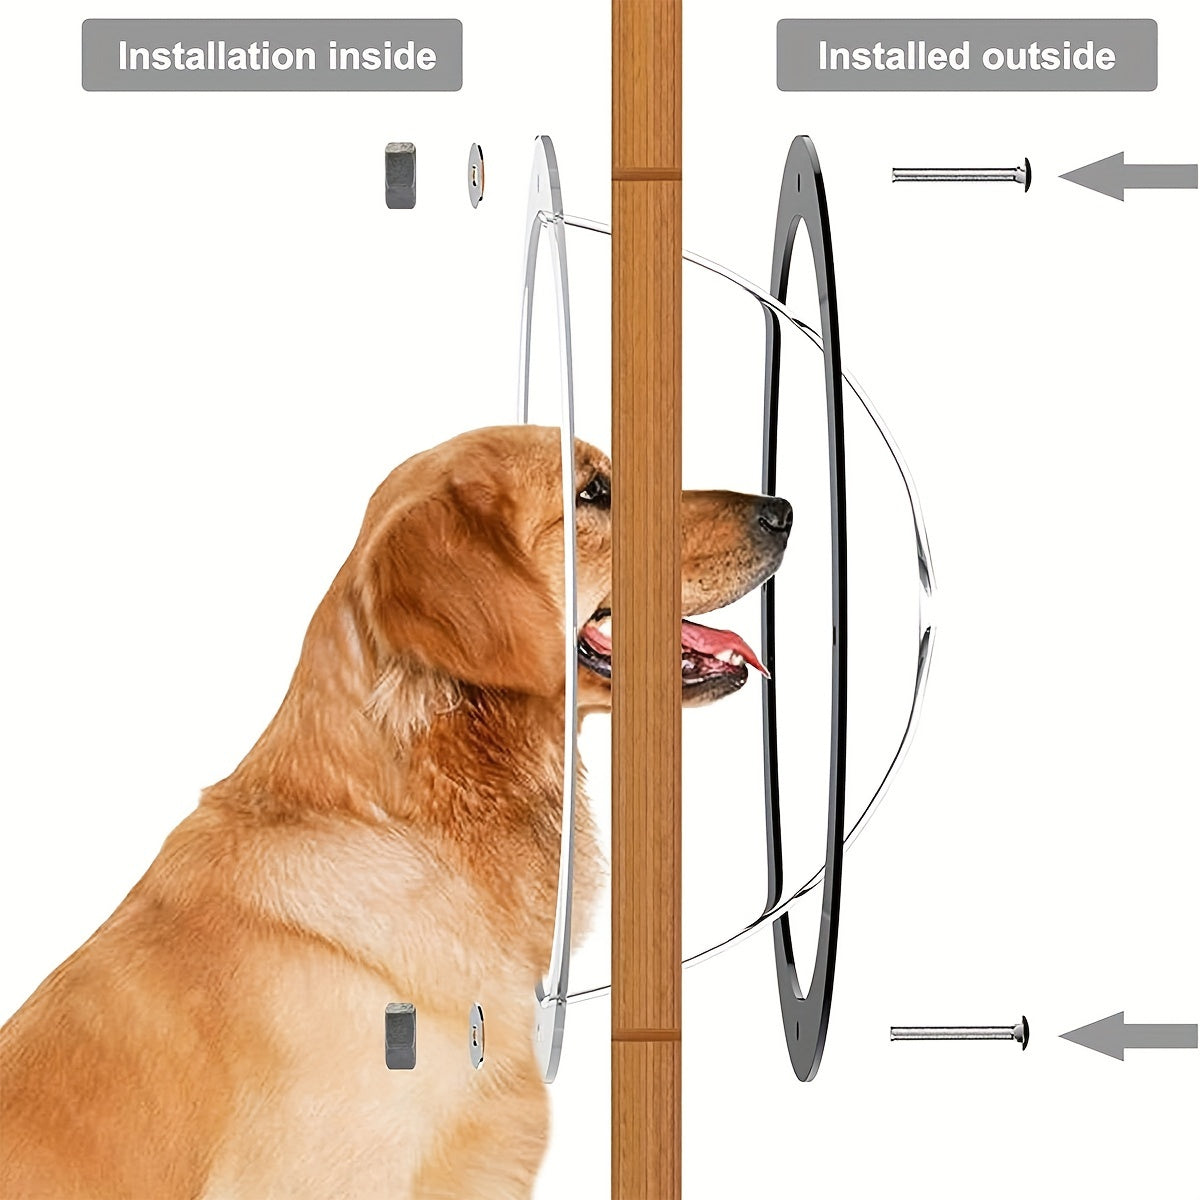 Acrylic Pet Viewing Window - Transparent Dome Fence For Dogs & Cats, Space-Saving Door Design